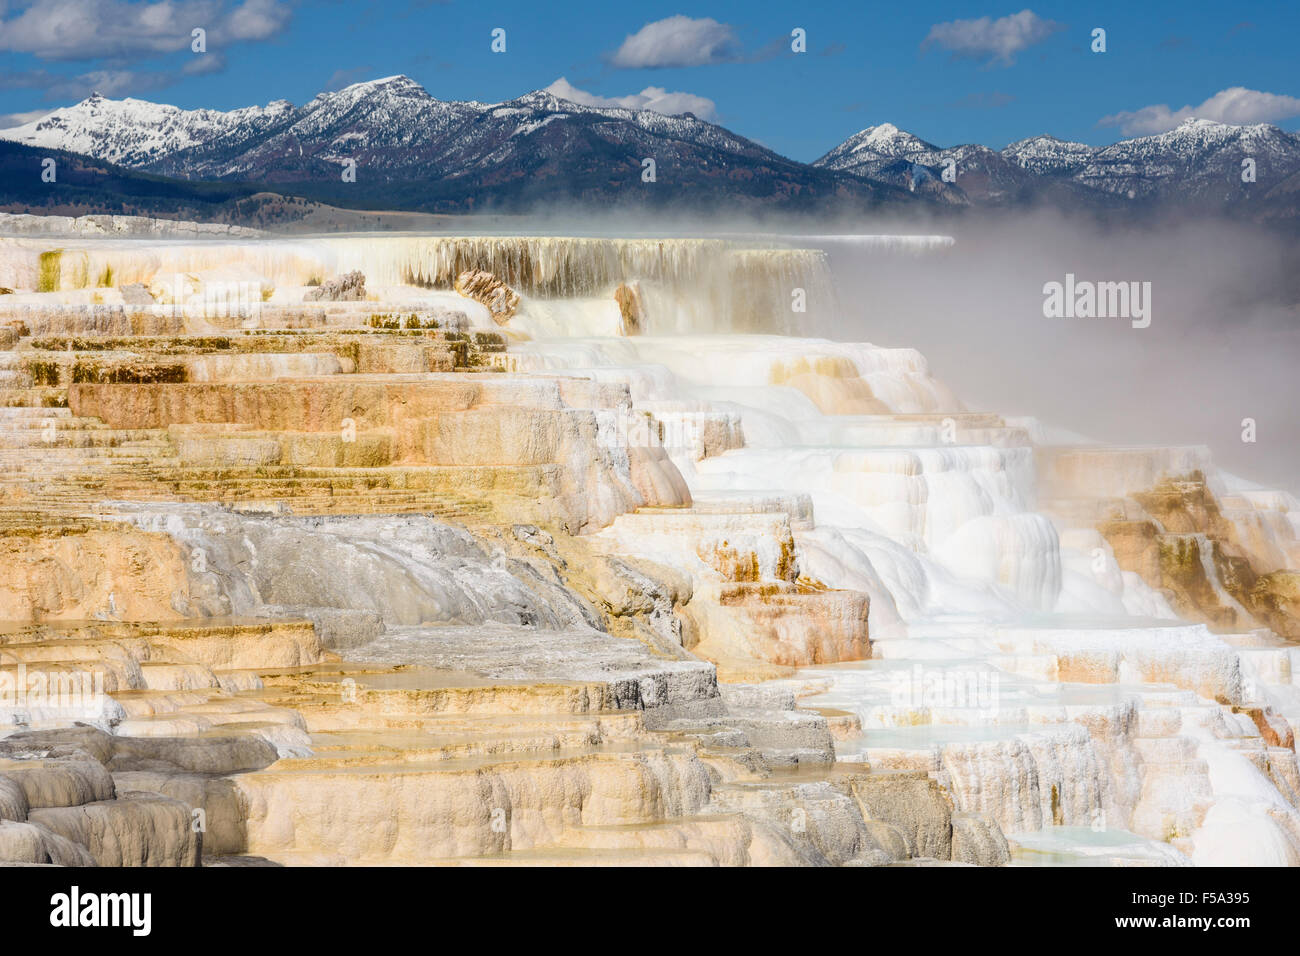 Canary Spring, Travertine Terraces, Mammoth Hot Springs, Yellowstone National Park, Wyoming, USA Stock Photo